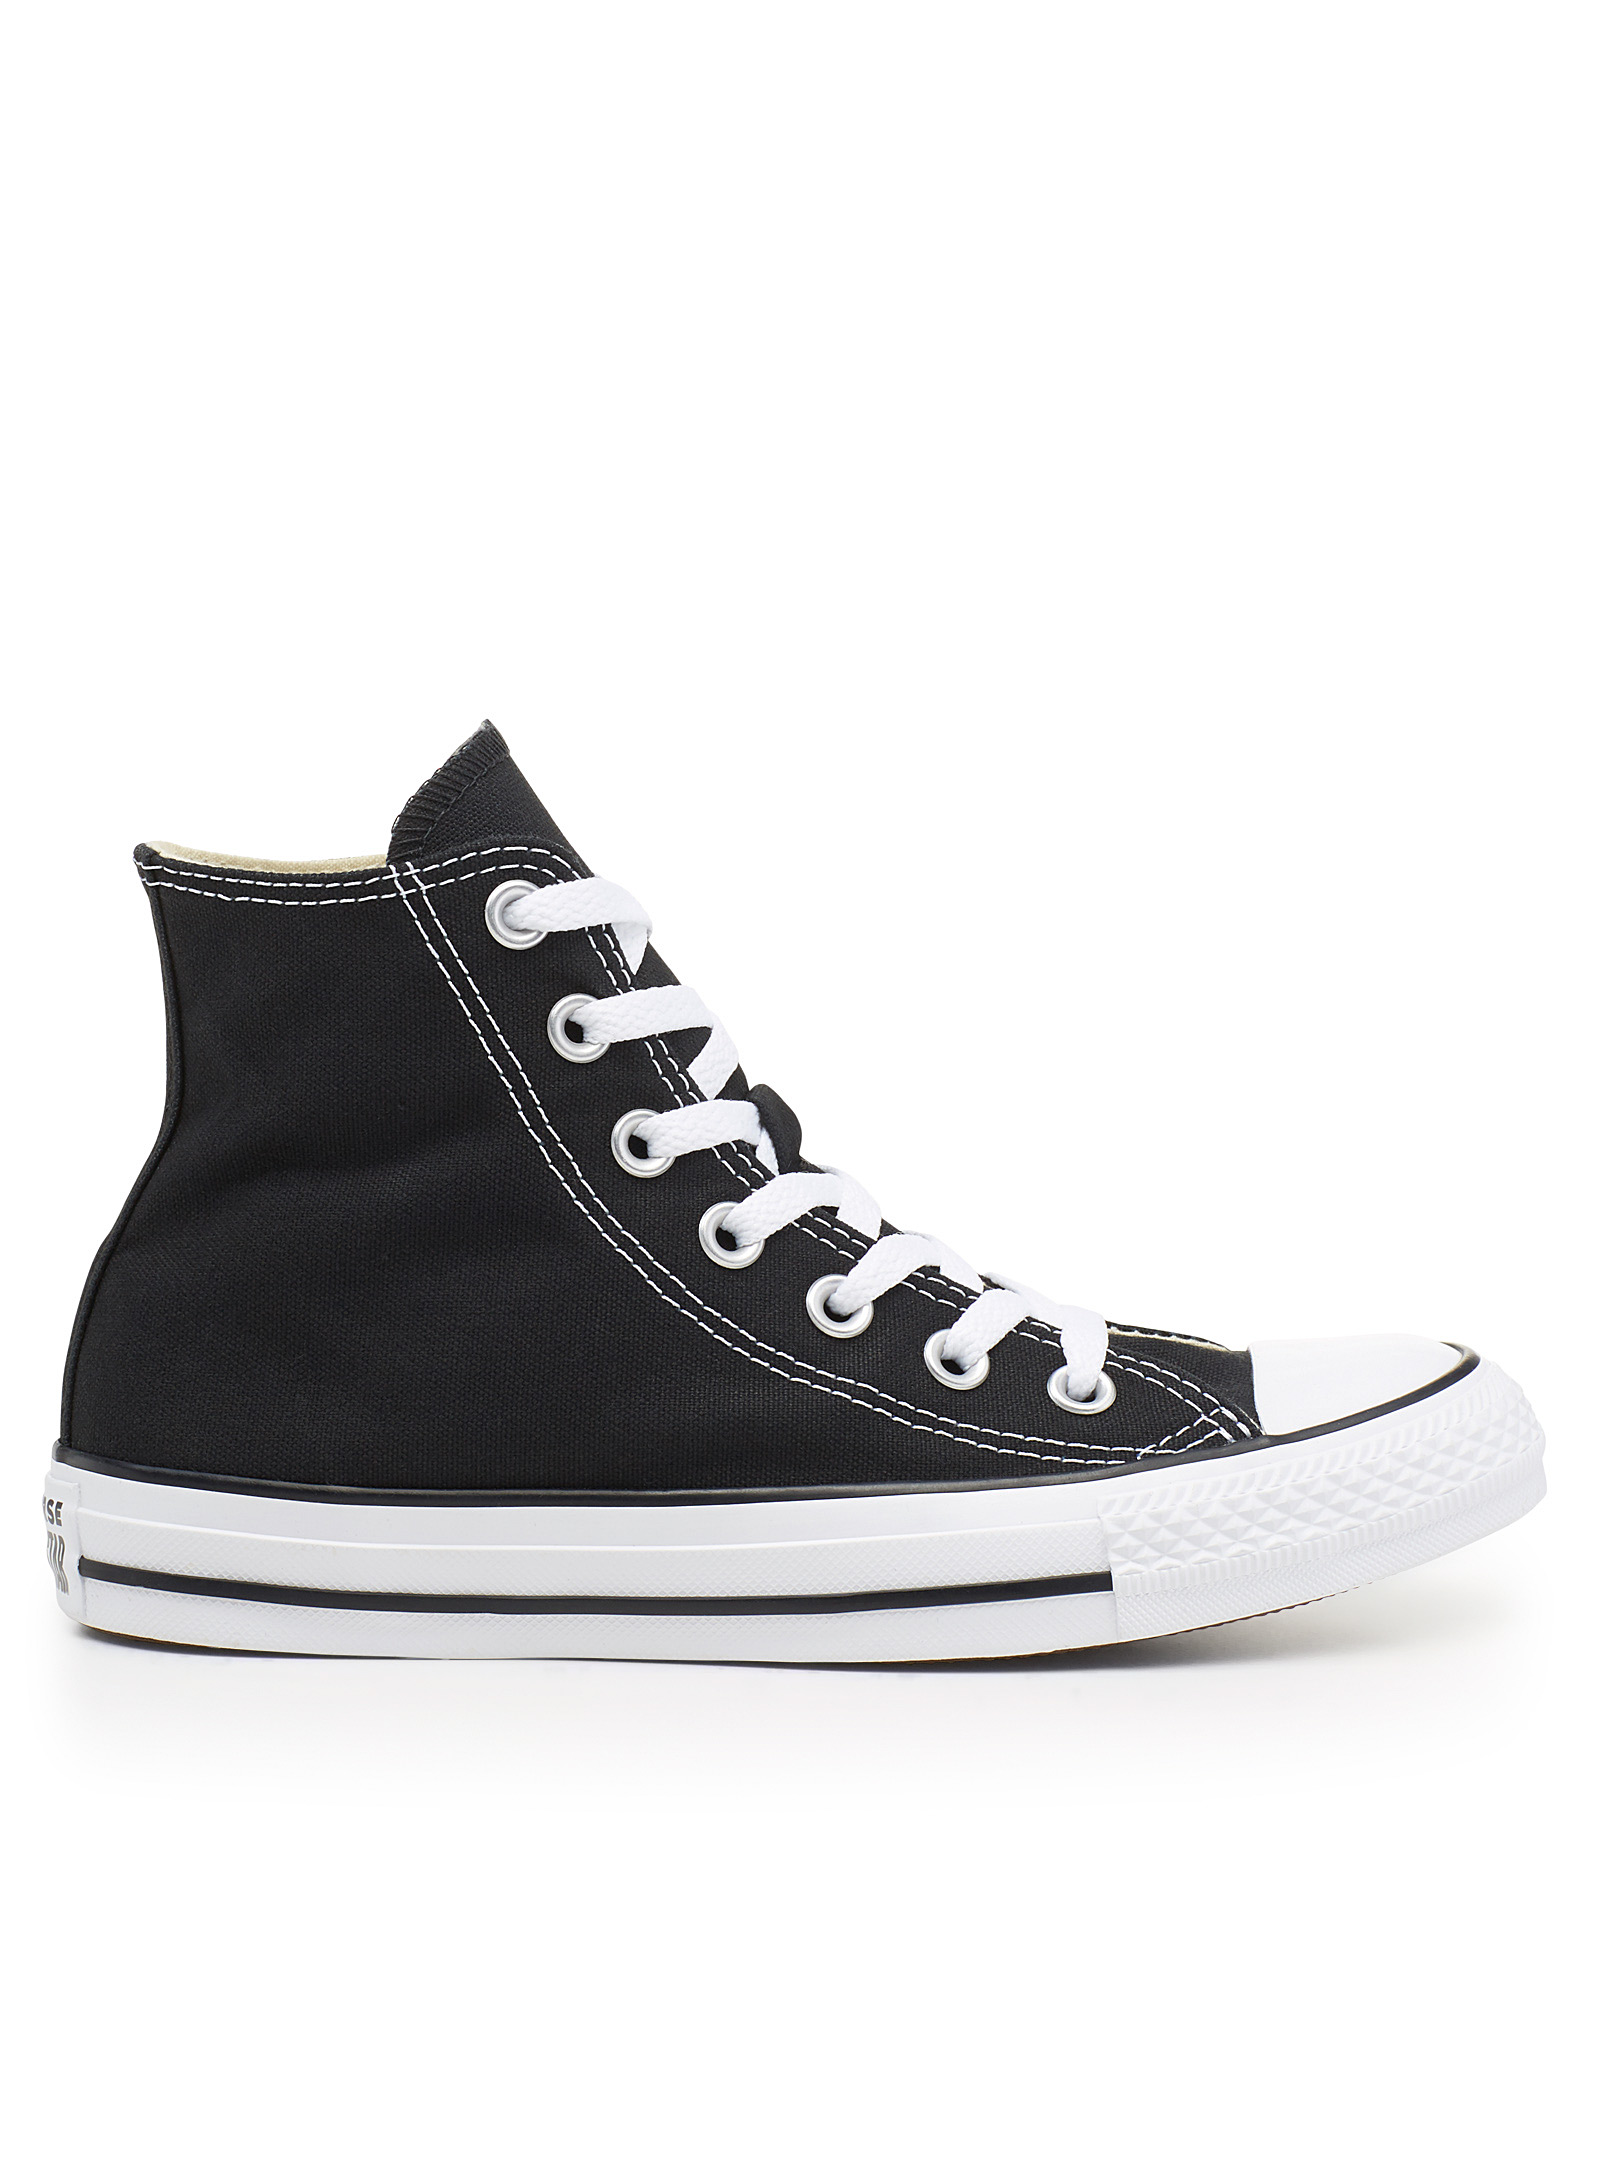 converse sneakers | Square One